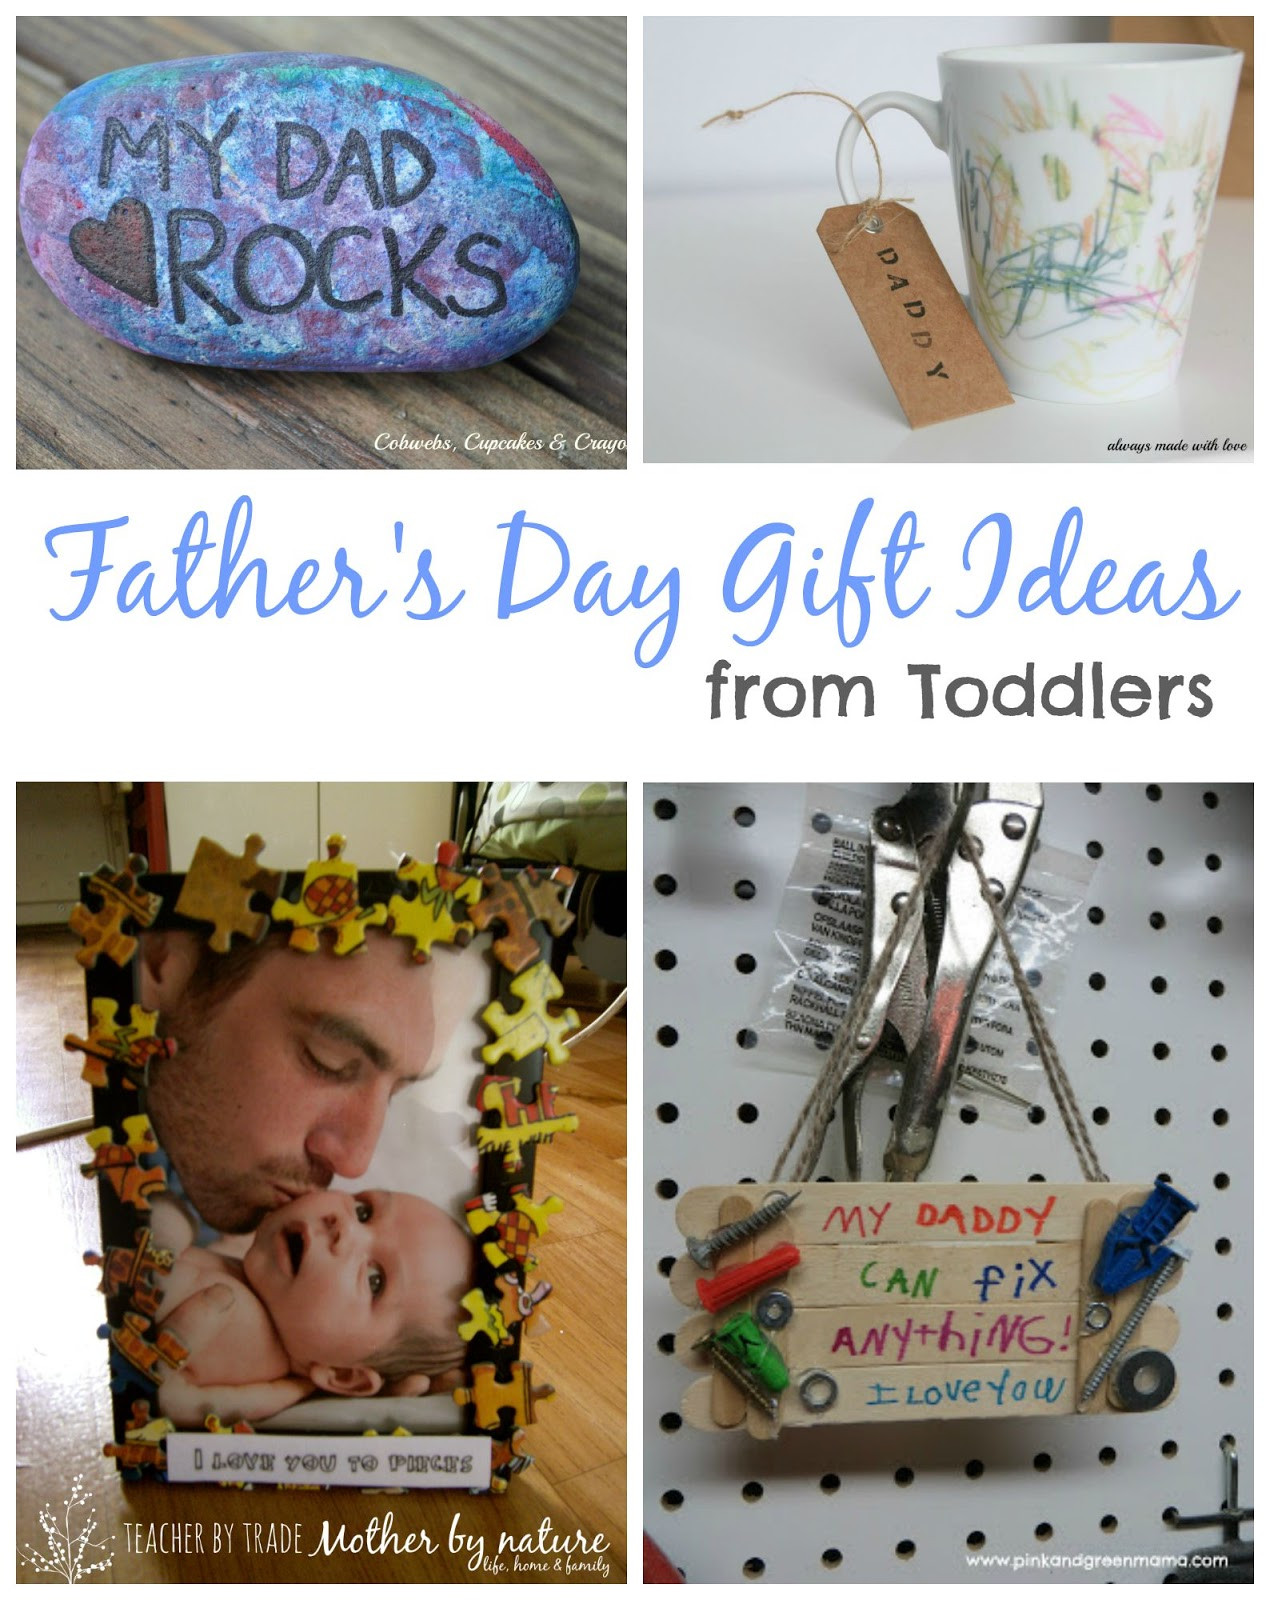 Fathers Day Gift From Toddlers
 Father s Day Gift Ideas from Toddlers Teacher by trade